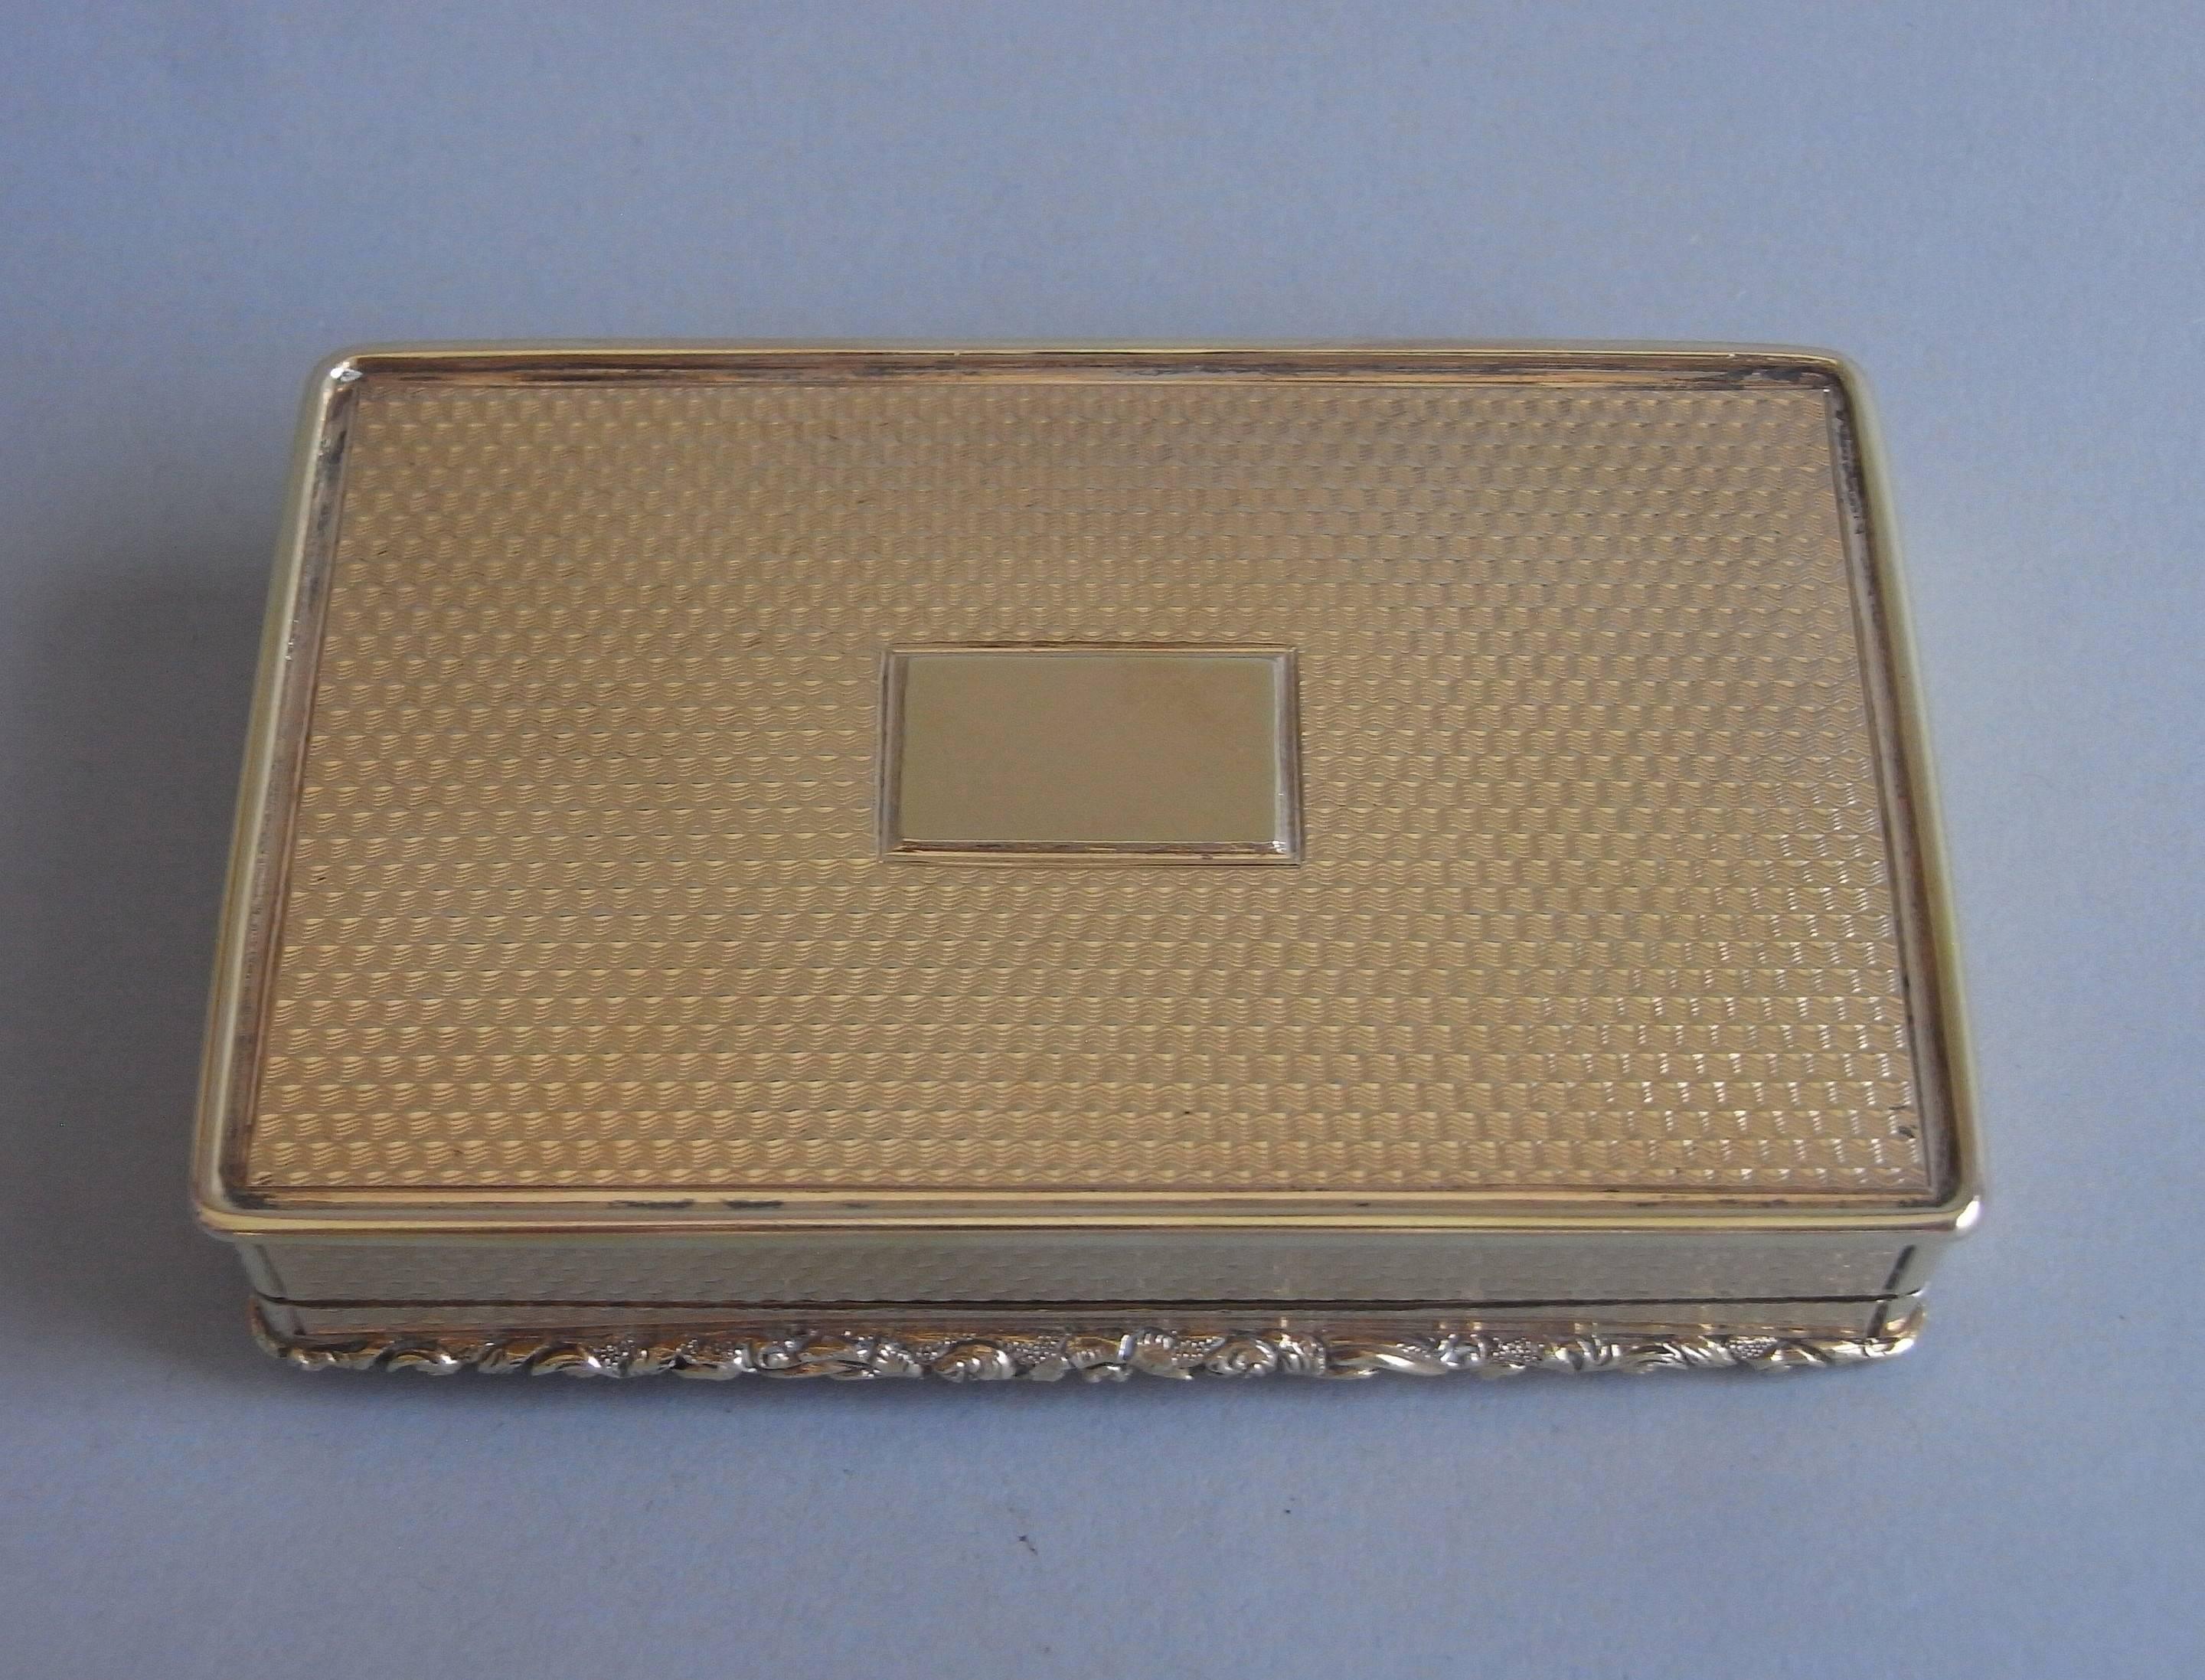 English THE MAZEPPA BOX - A very rare and exceptional William IV Silver Gilt Table Snuff